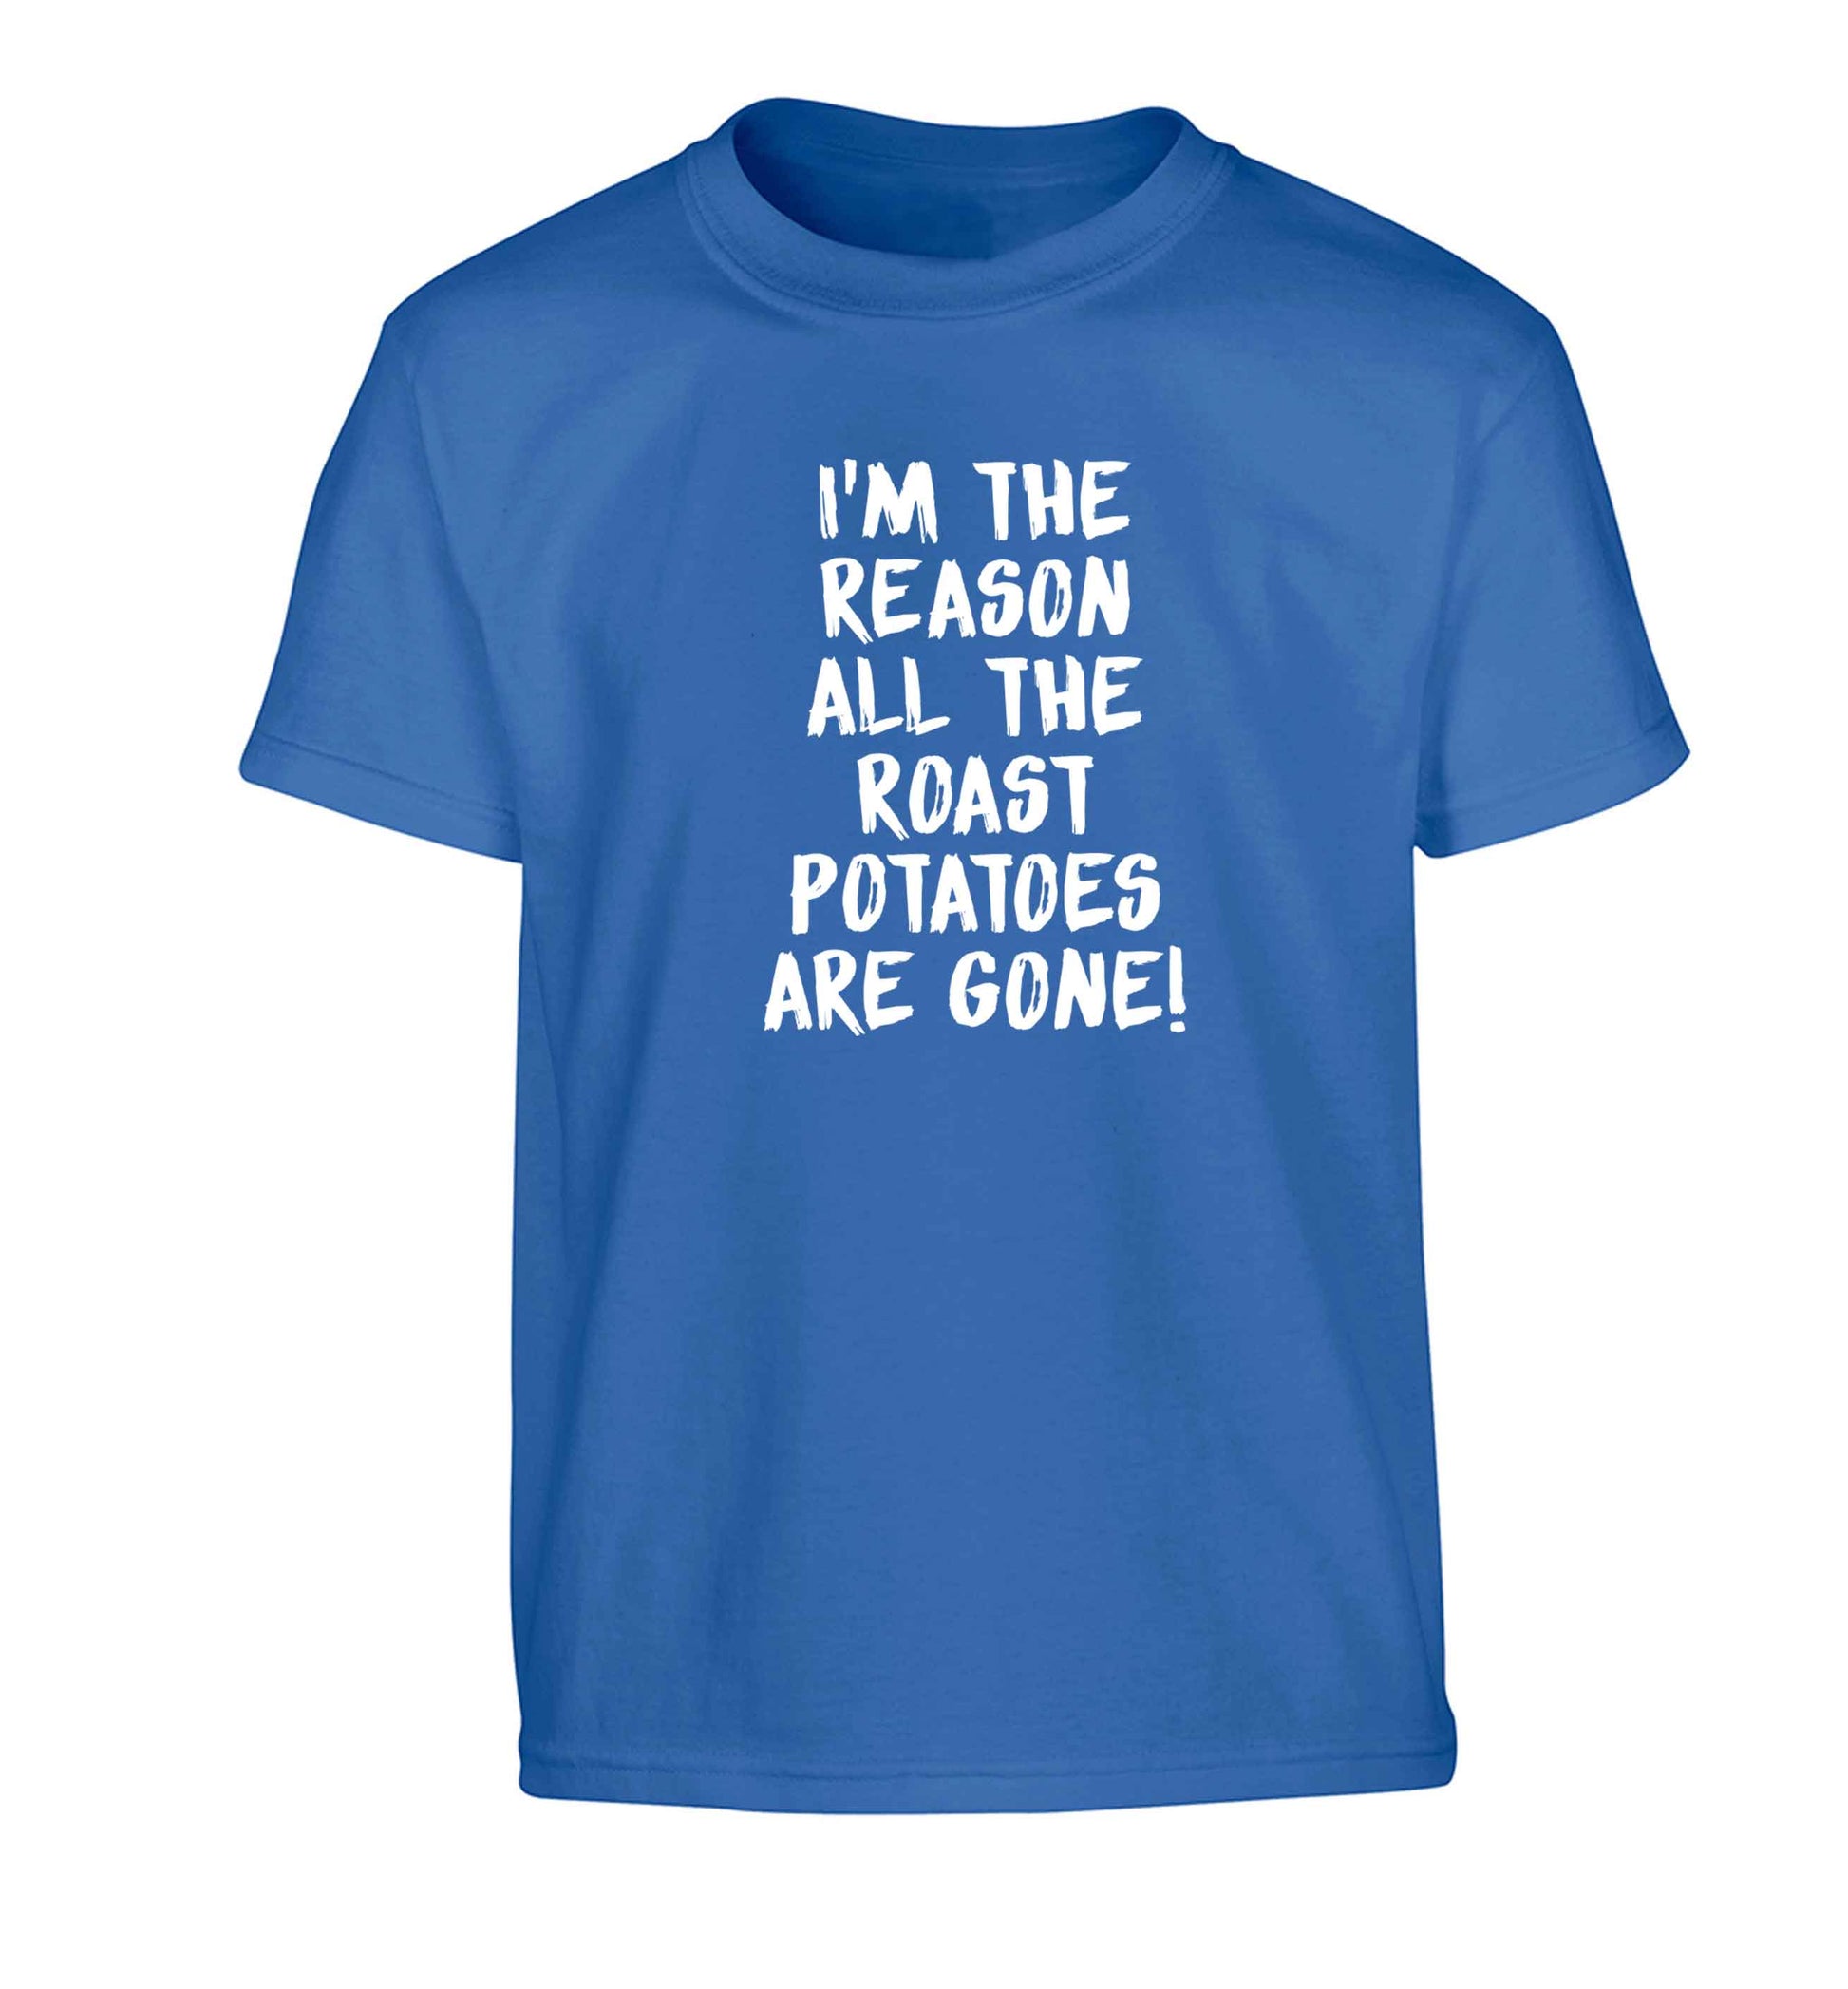 I'm the reason all the roast potatoes are gone Children's blue Tshirt 12-13 Years